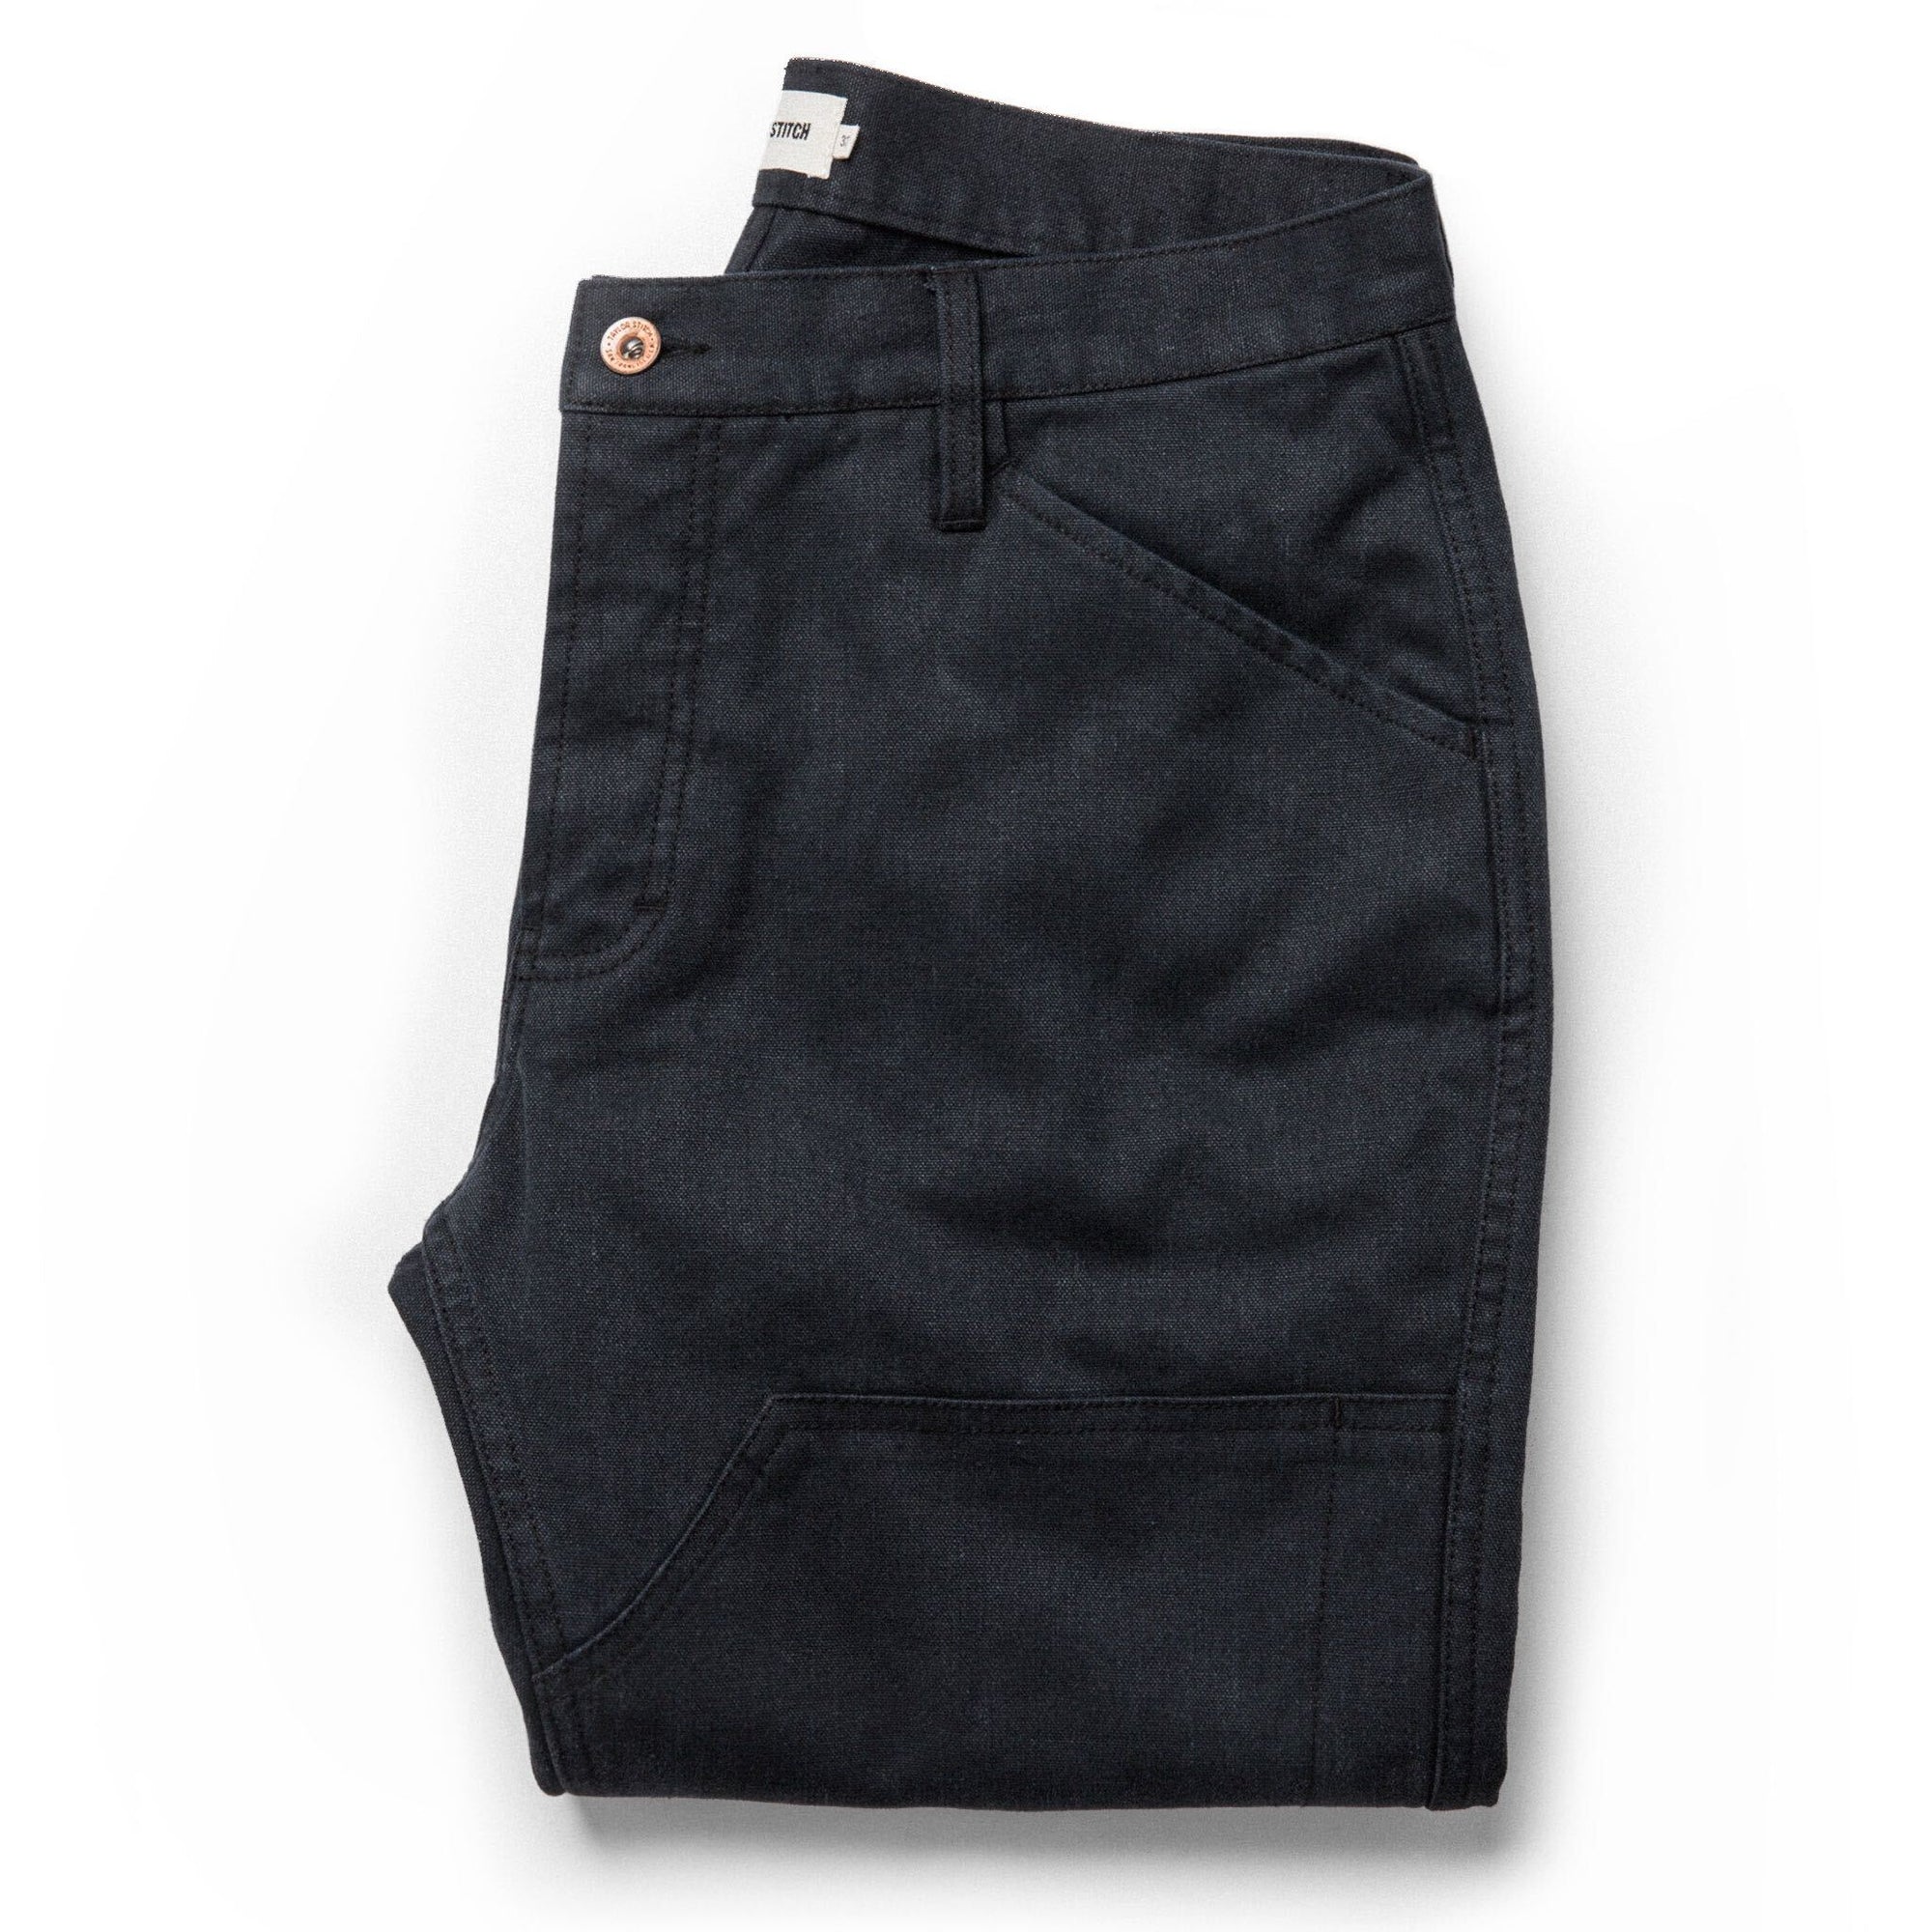 Taylor Stitch Camp Pant in Tobacco Boss Duck - Earl's Authentics